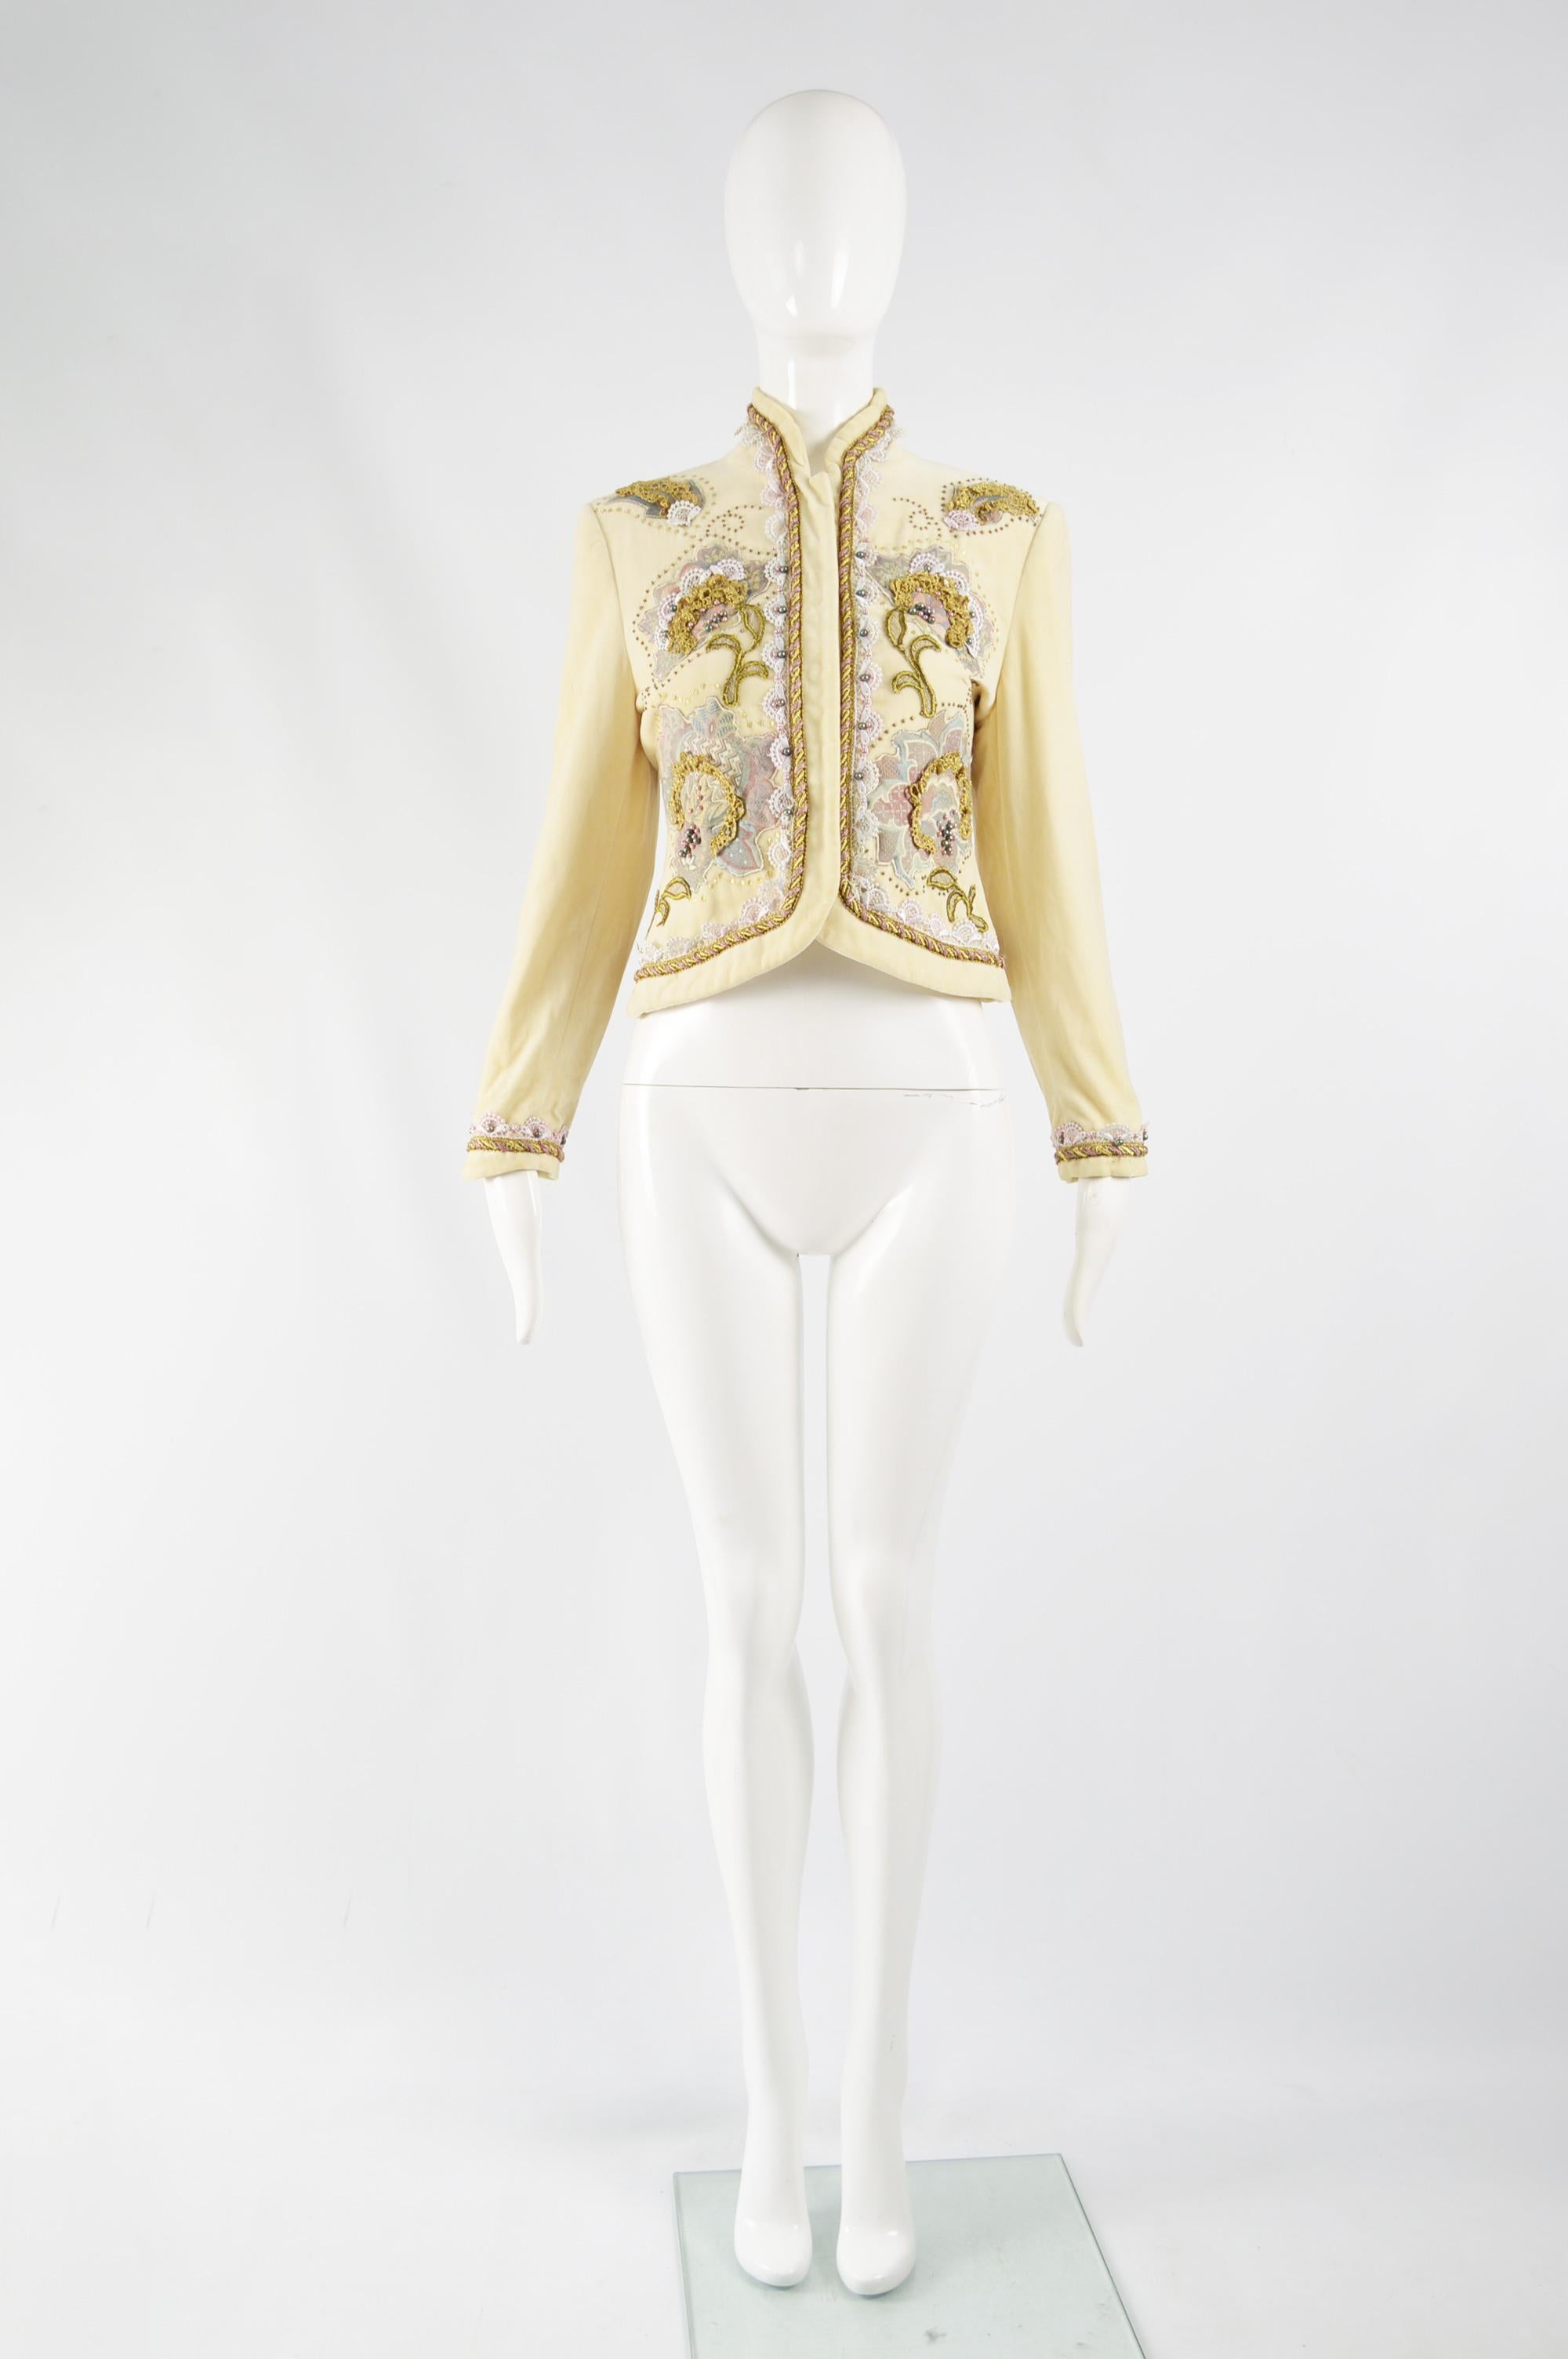 A fabulous vintage womens jacket from the 80s by luxury Italian fashion house, Byblos. In a cream velvet with floral tapestry appliques, beads, sequins and a broderie anglaise trim. Perfect for a party or evening event. 

Size: Marked IT 40 which